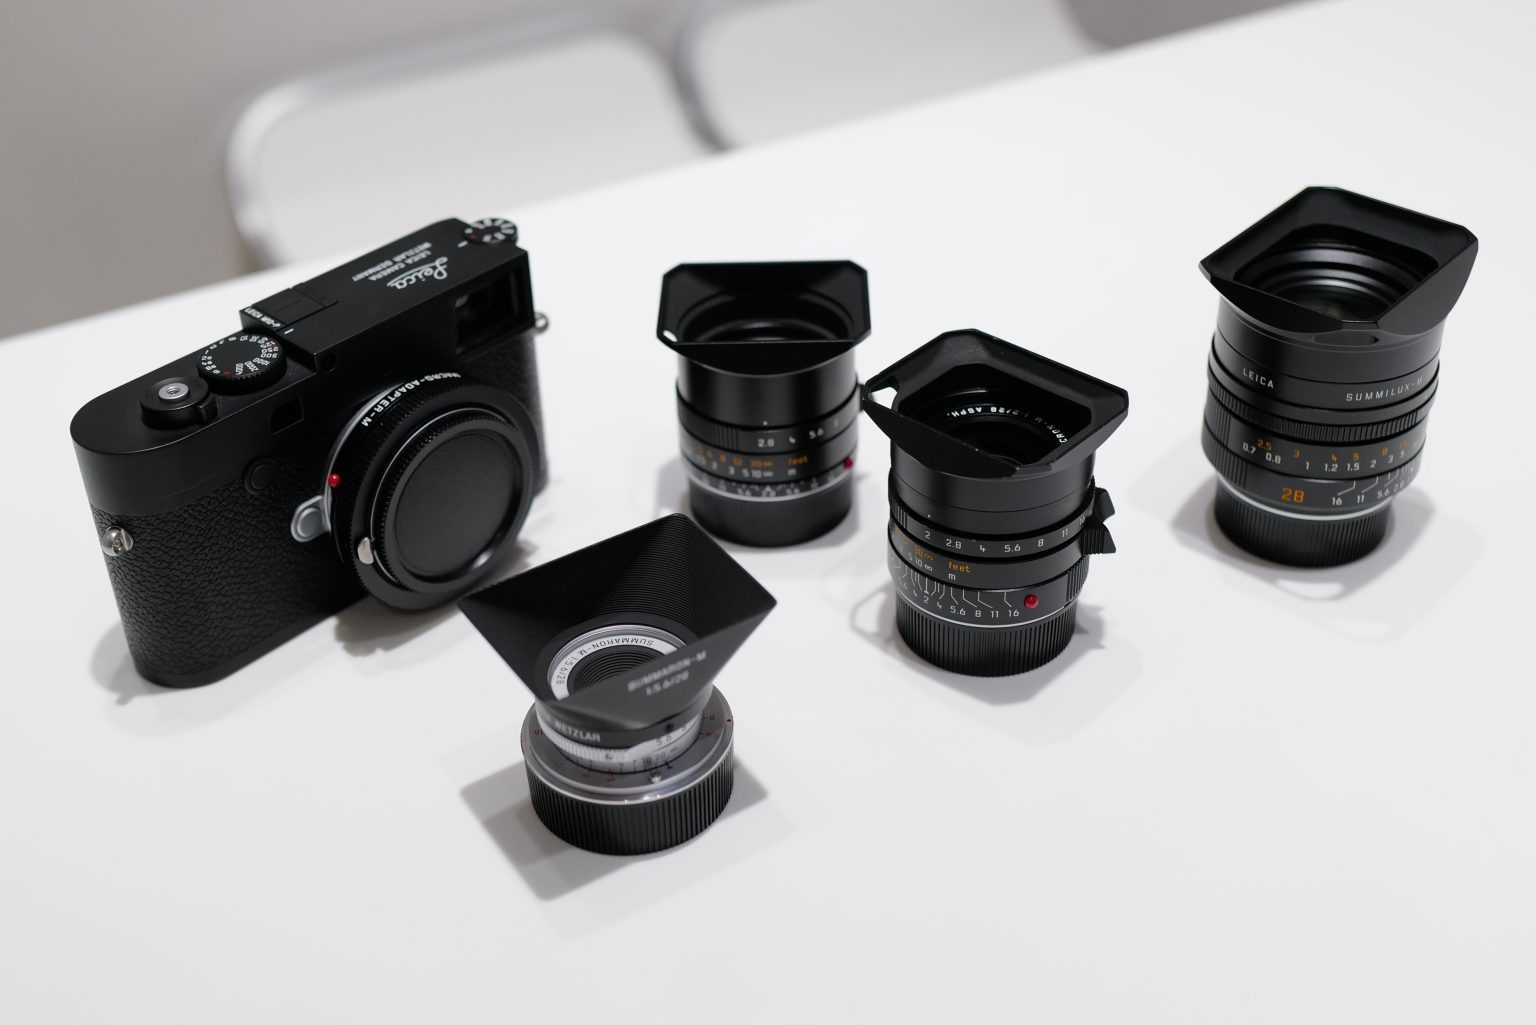 【Leica】How to Digital Leica マクロアダプターM Typ240編 その⑤